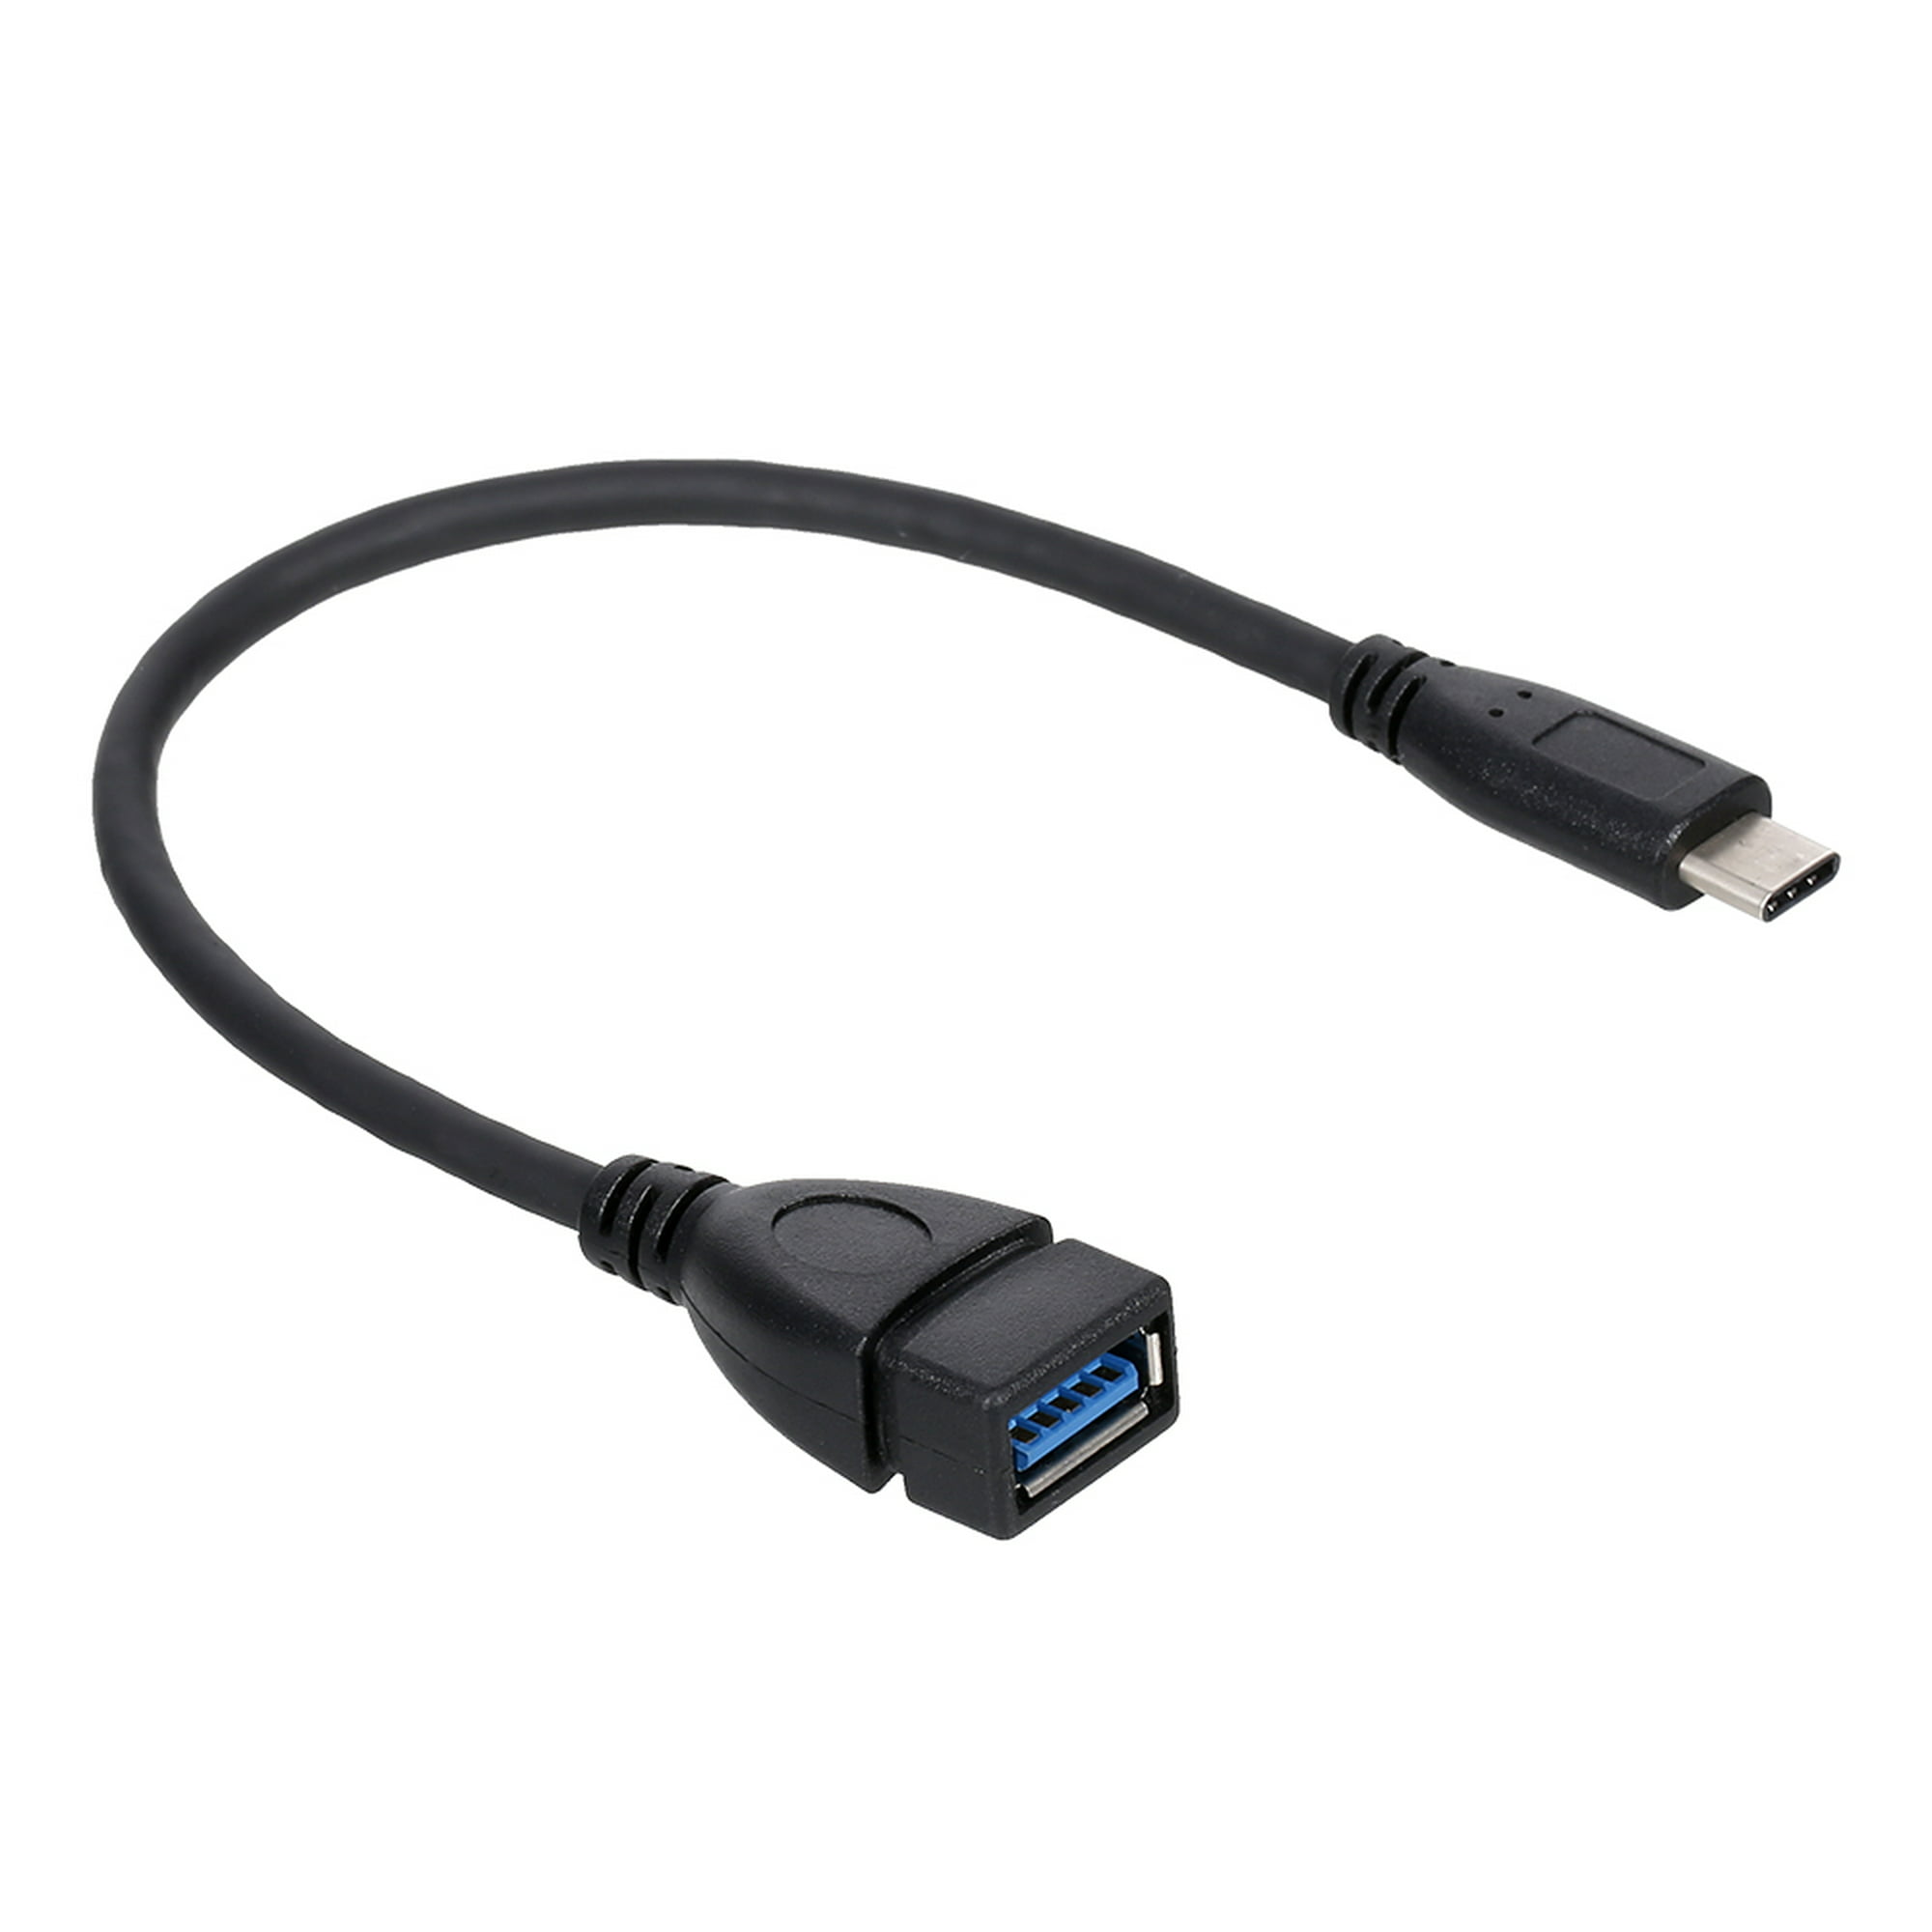 Tipo-C a USB3.0 Cable adaptador Cable OTG Tipo-C a yeacher cable